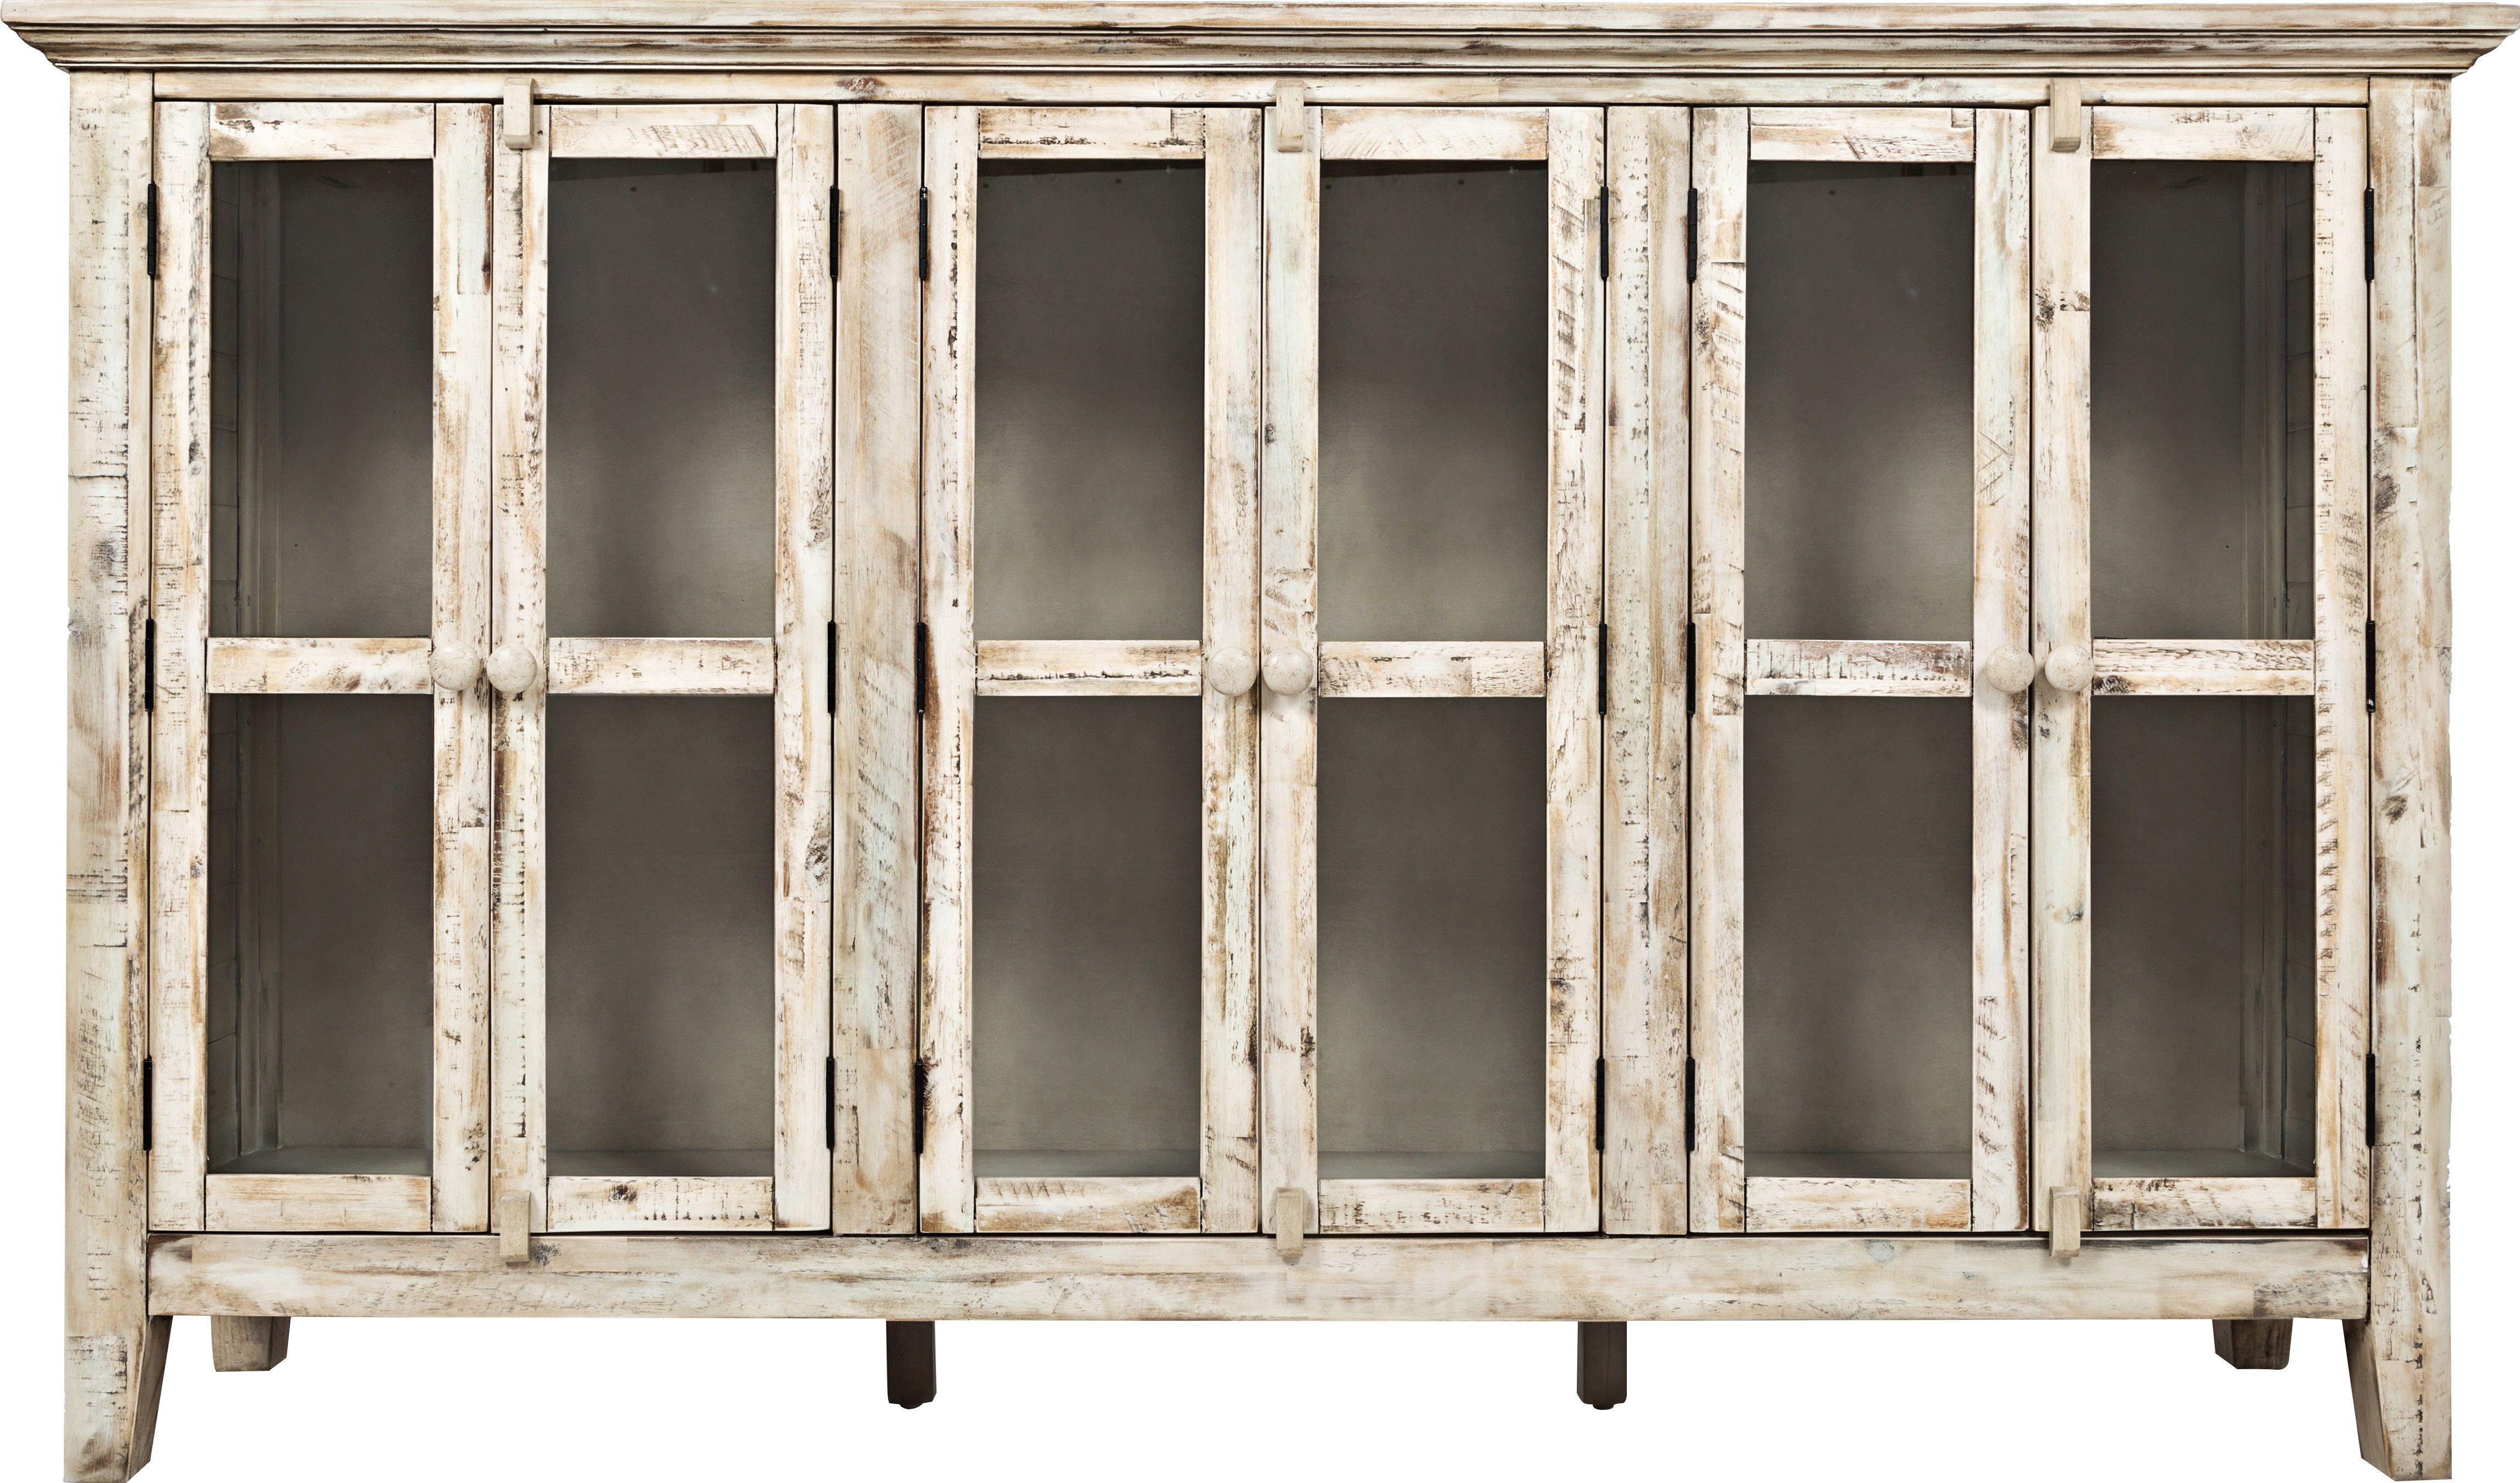 Farmhouse & Rustic Accent Chests & Cabinets | Birch Lane Within Current Kara 4 Door Accent Cabinets (View 13 of 20)